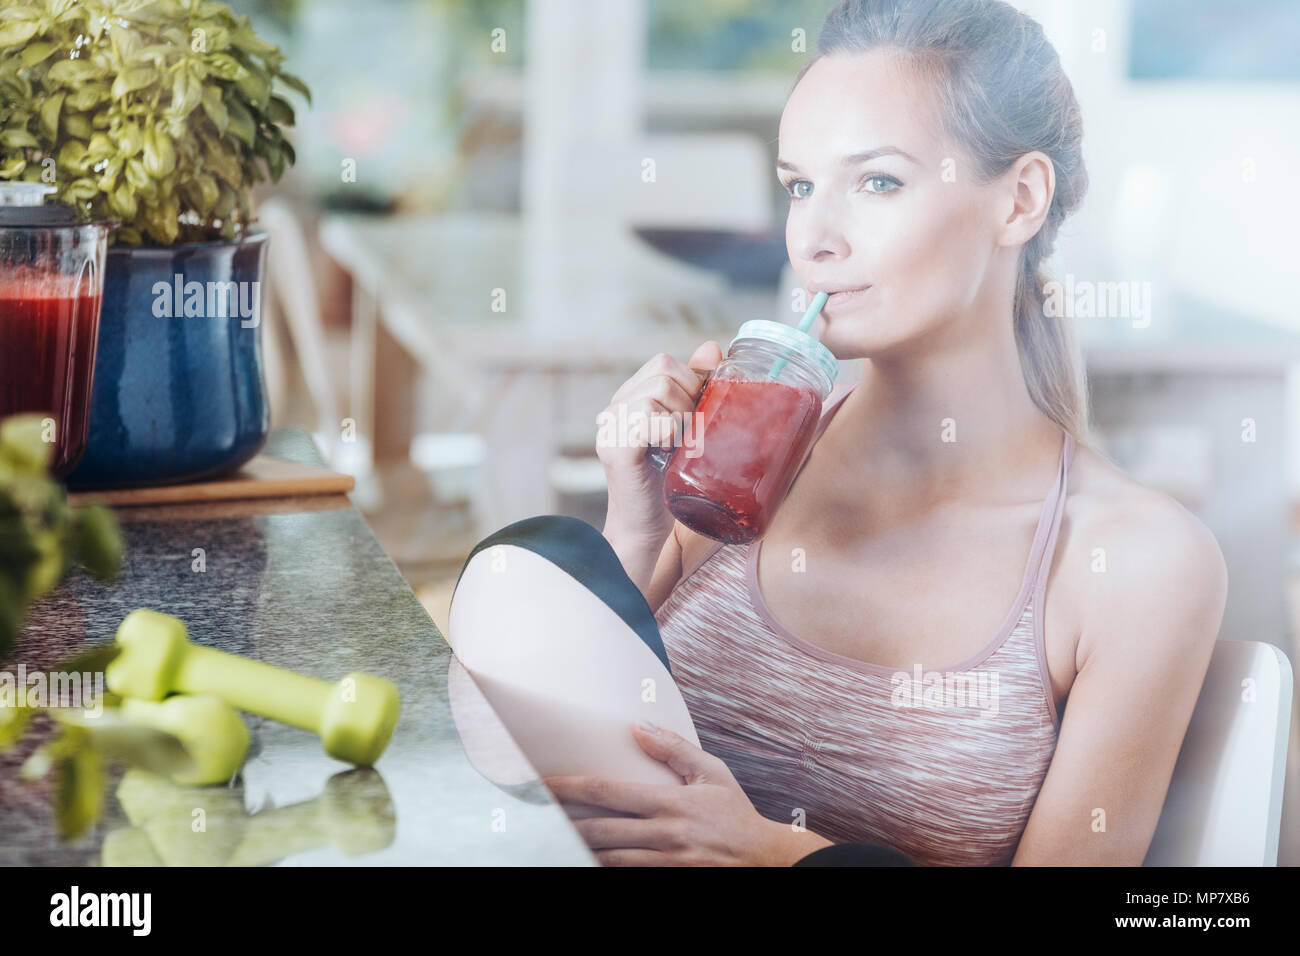 Sportswoman on detox diet purifying body by drinking healthy red cocktail after gymnastics Stock Photo